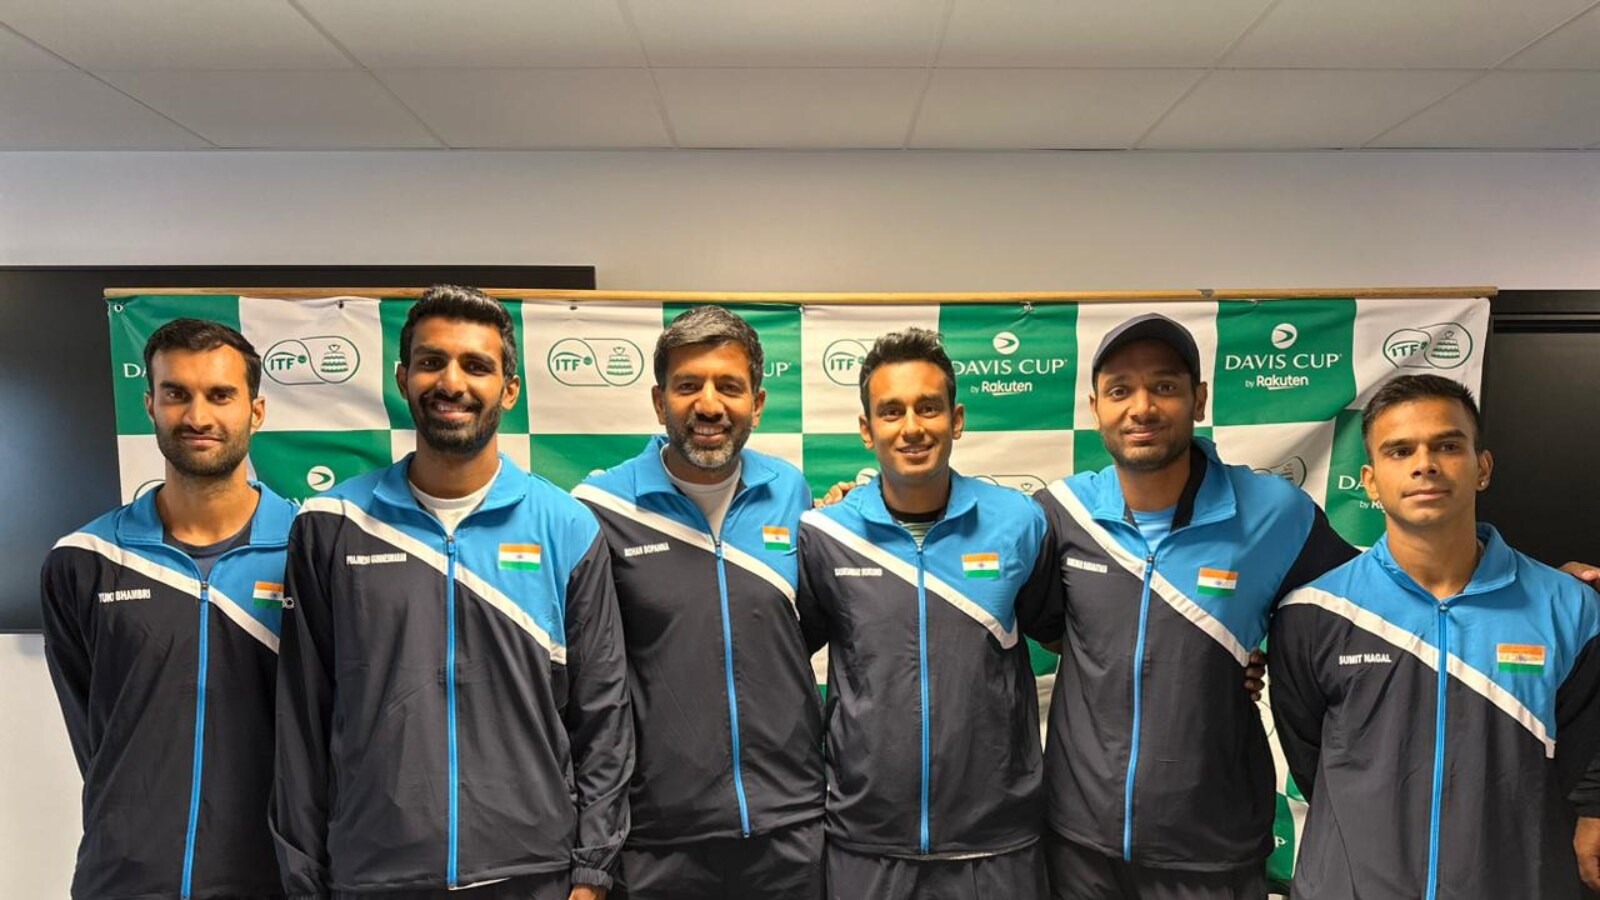 Davis Cup: India vs Denmark in World Group I Play-off Tie